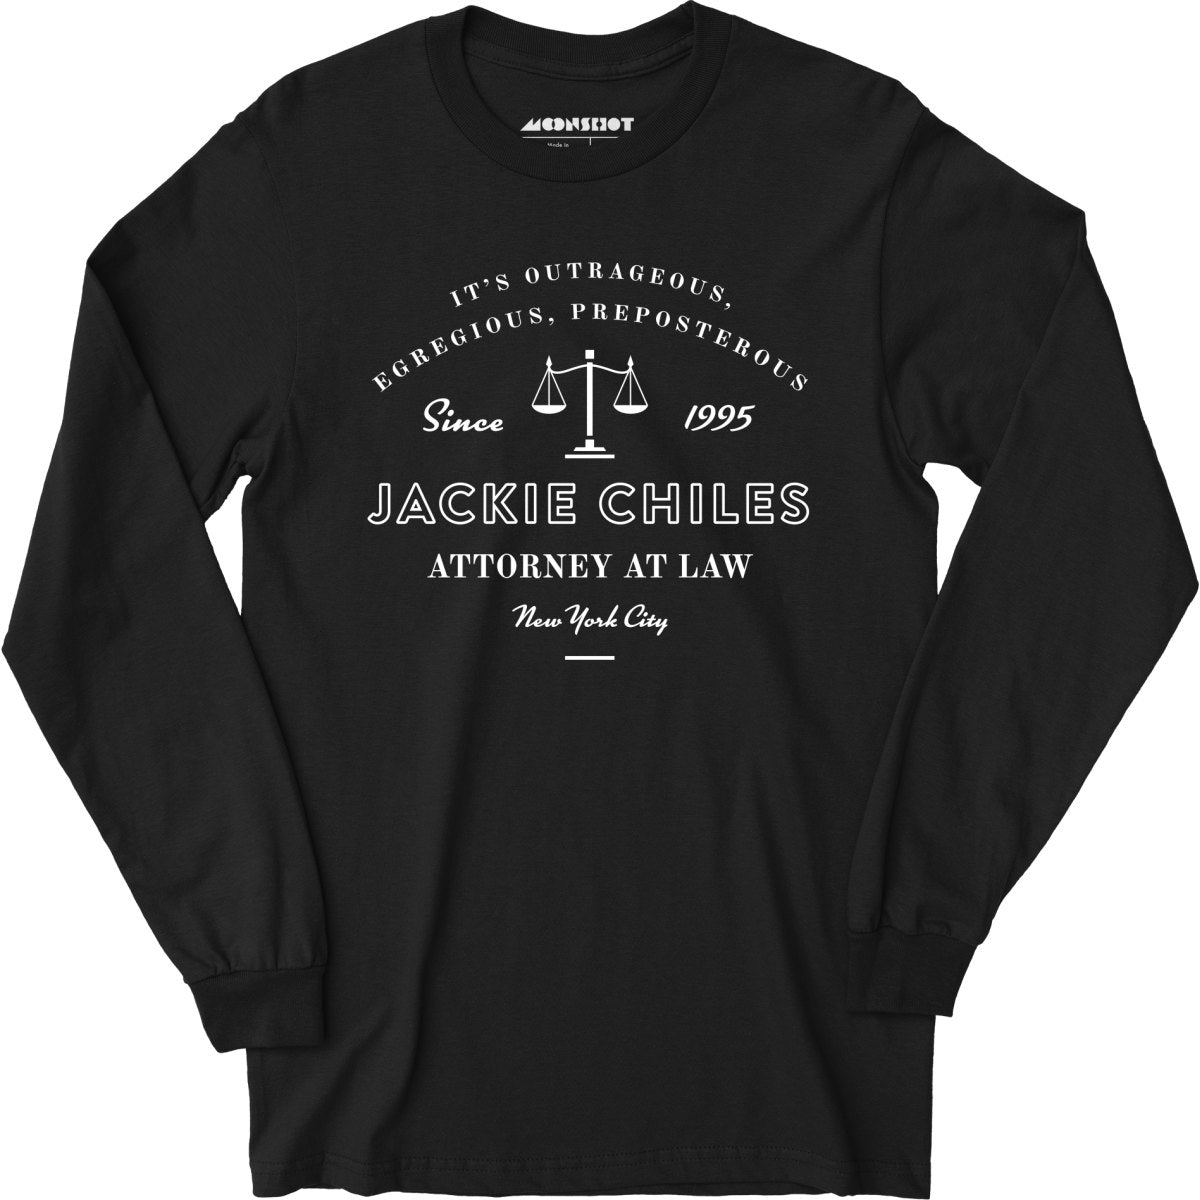 Jackie Chiles Outrageous Egregious Preposterous - Long Sleeve T-Shirt